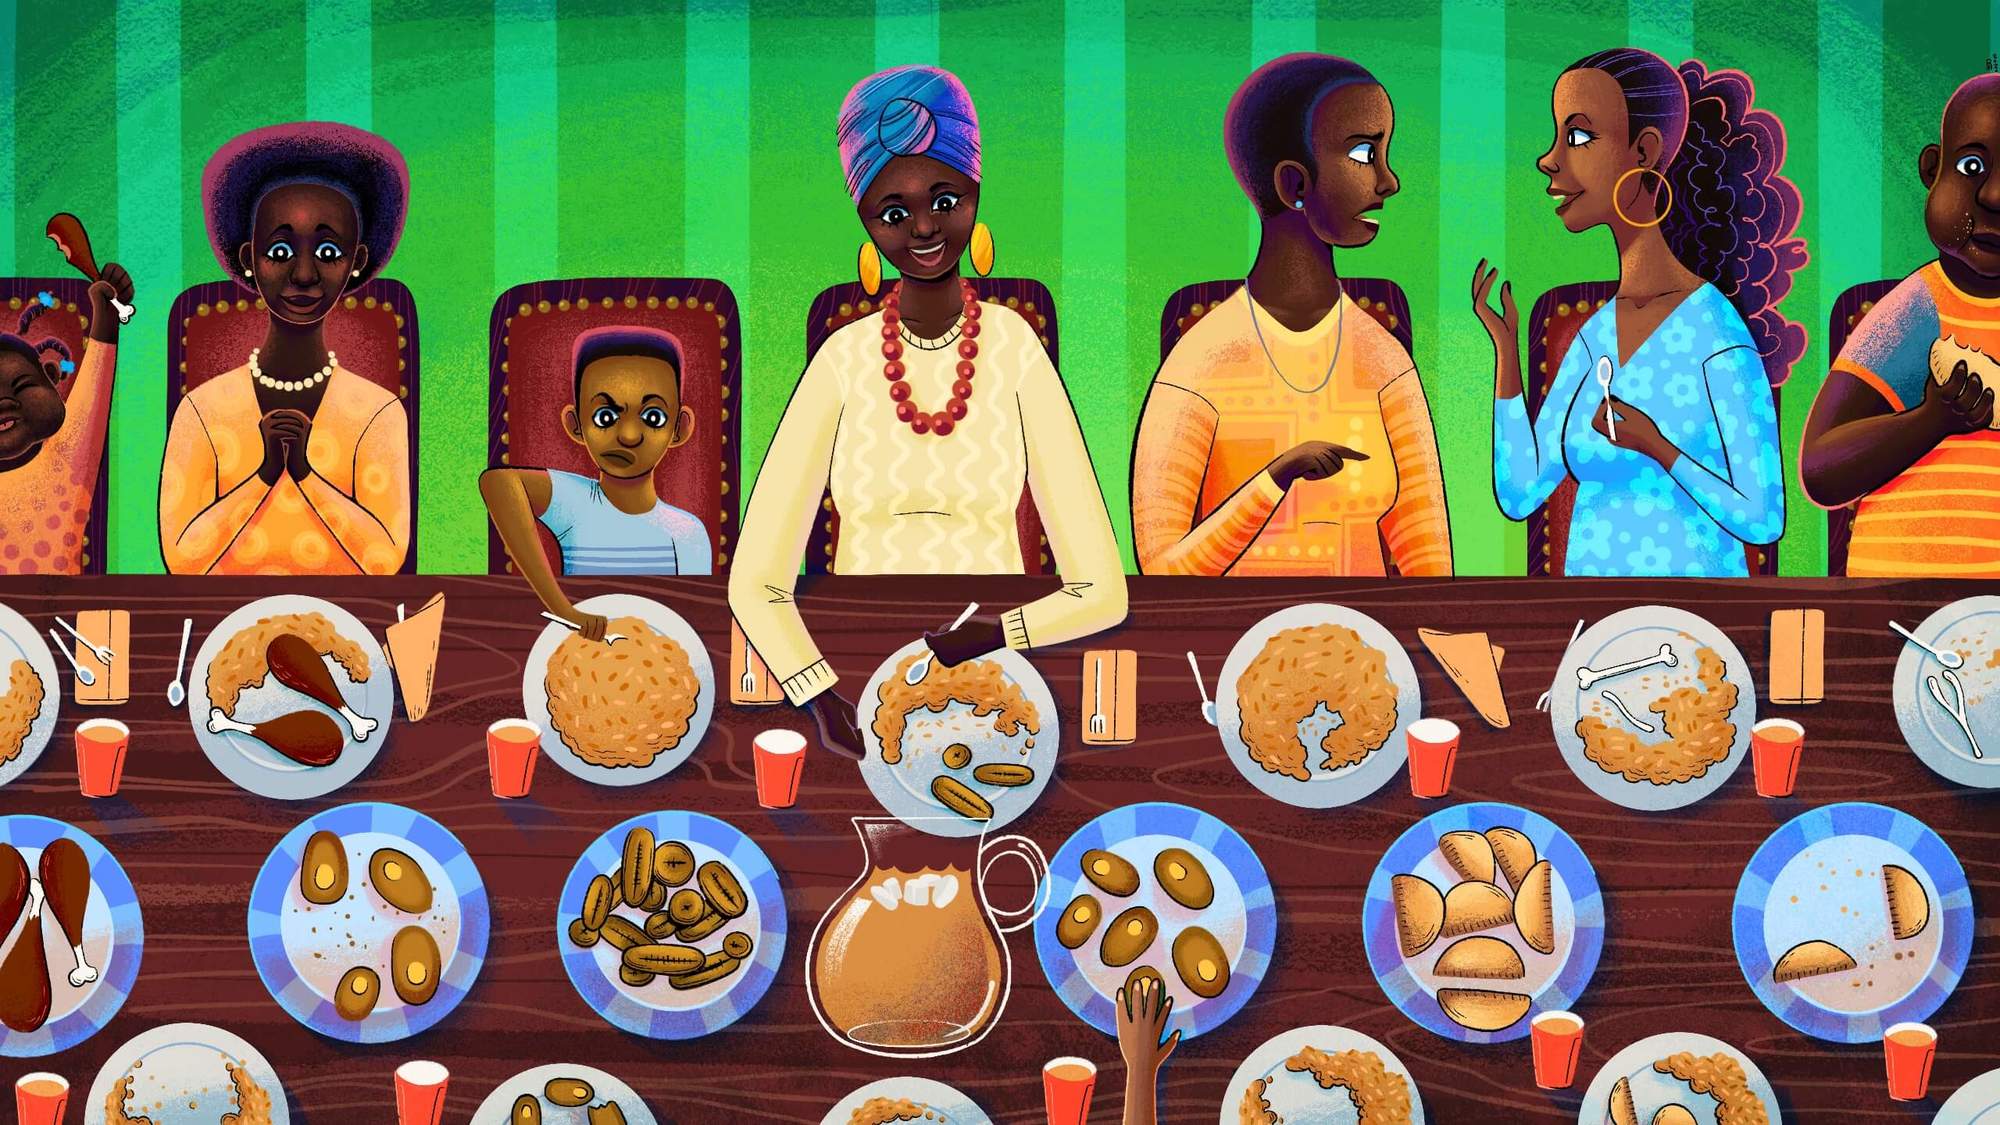 An illustration of West Africans gathered around the table eating jollof rice and other dishes. December 2020